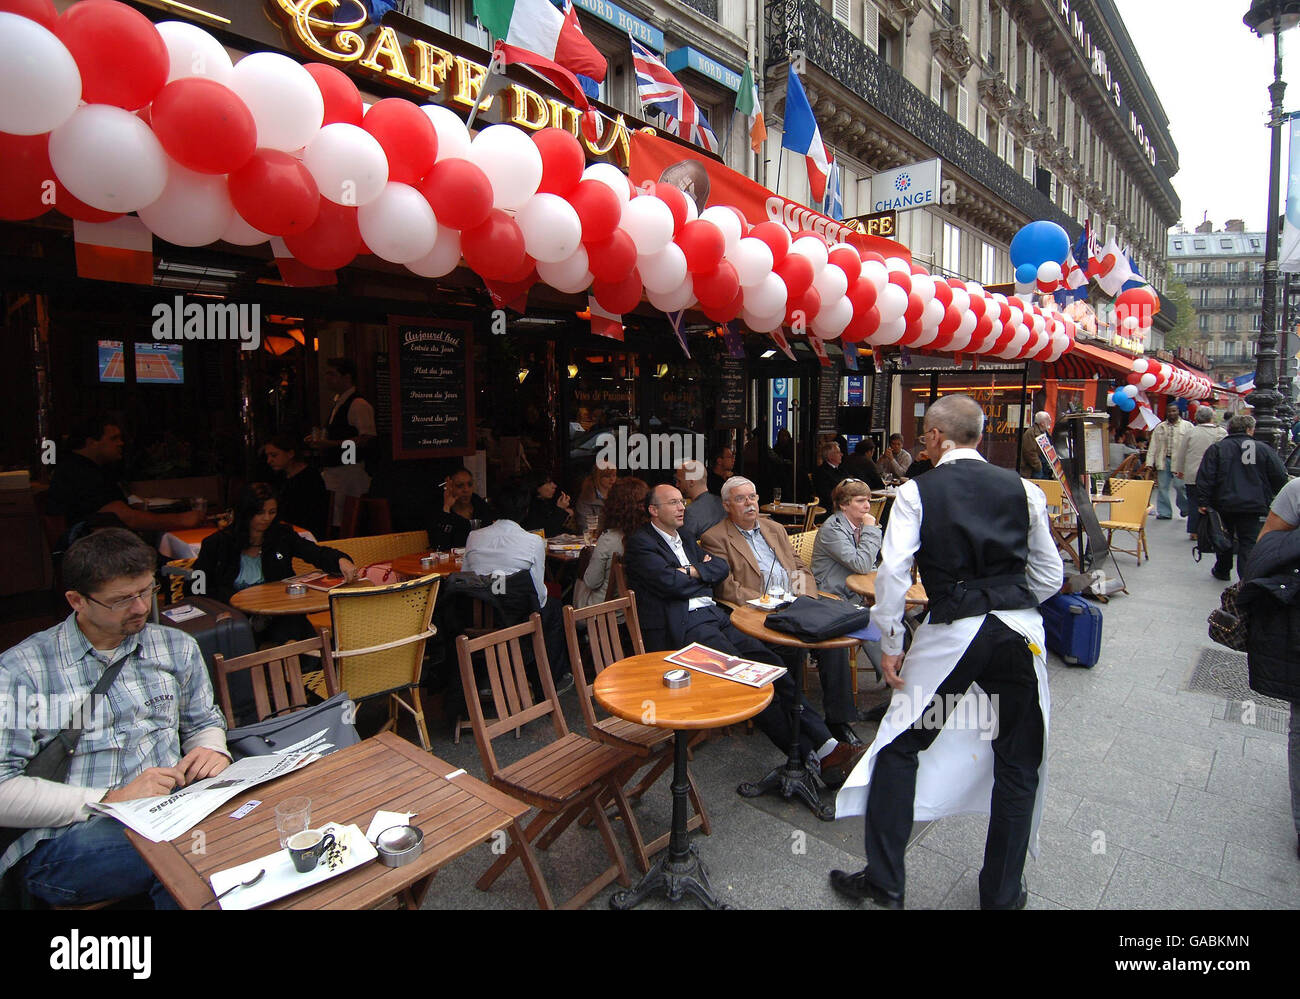 England play France in Paris in the Rugby World Cup Semi Final yet many of the bars and cafes in Paris are sporting the red and white colours of England and not the blue and white of their home team. Stock Photo